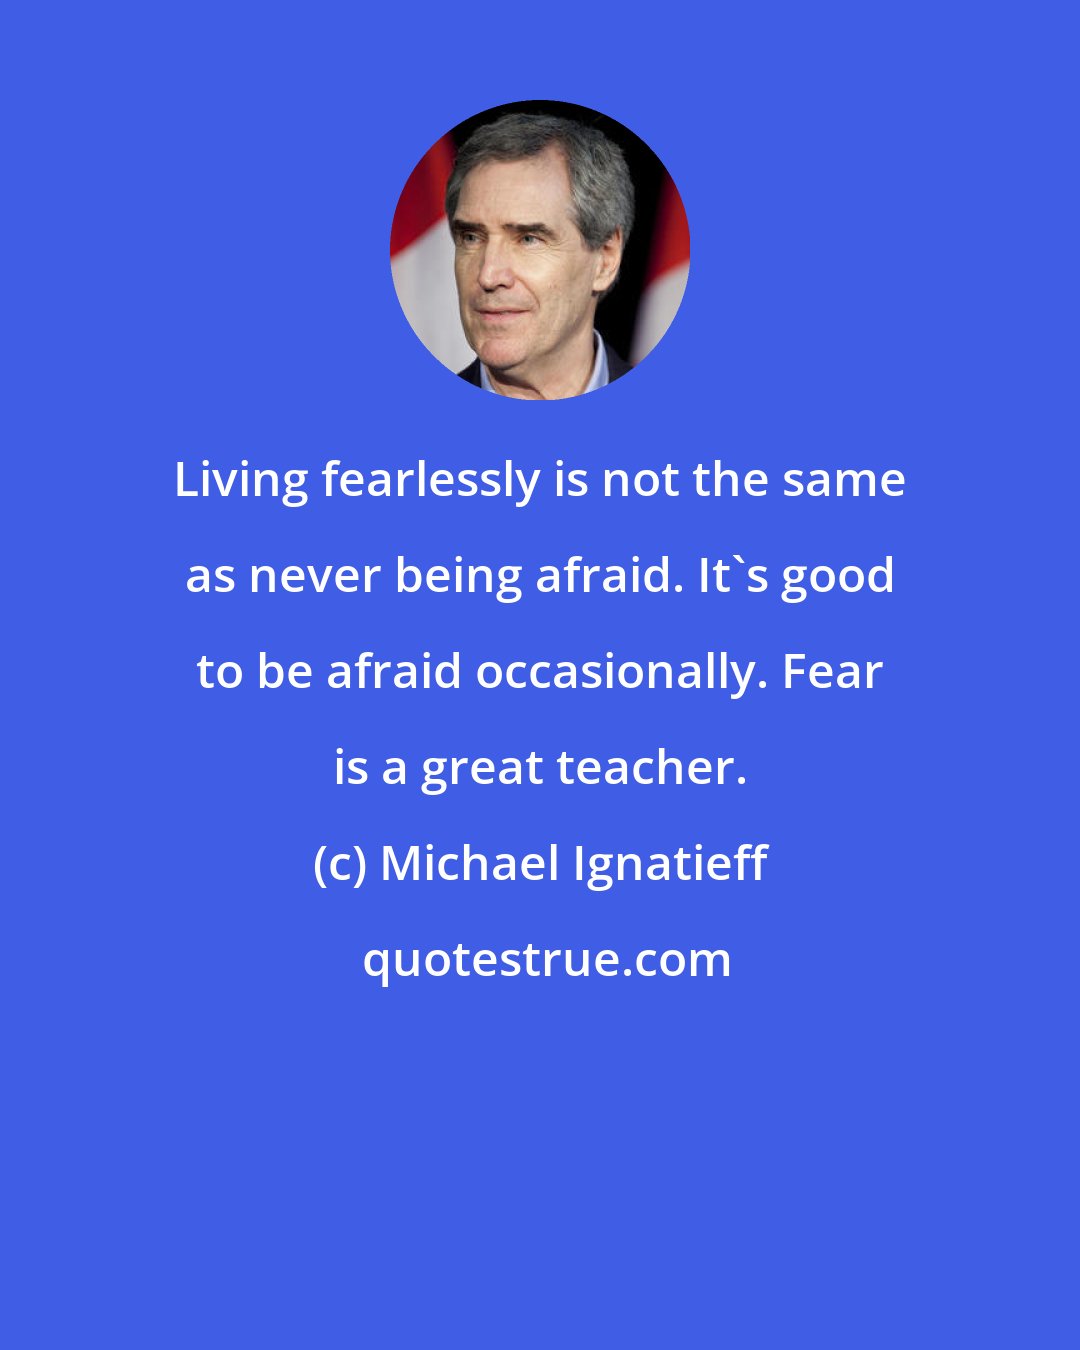 Michael Ignatieff: Living fearlessly is not the same as never being afraid. It's good to be afraid occasionally. Fear is a great teacher.